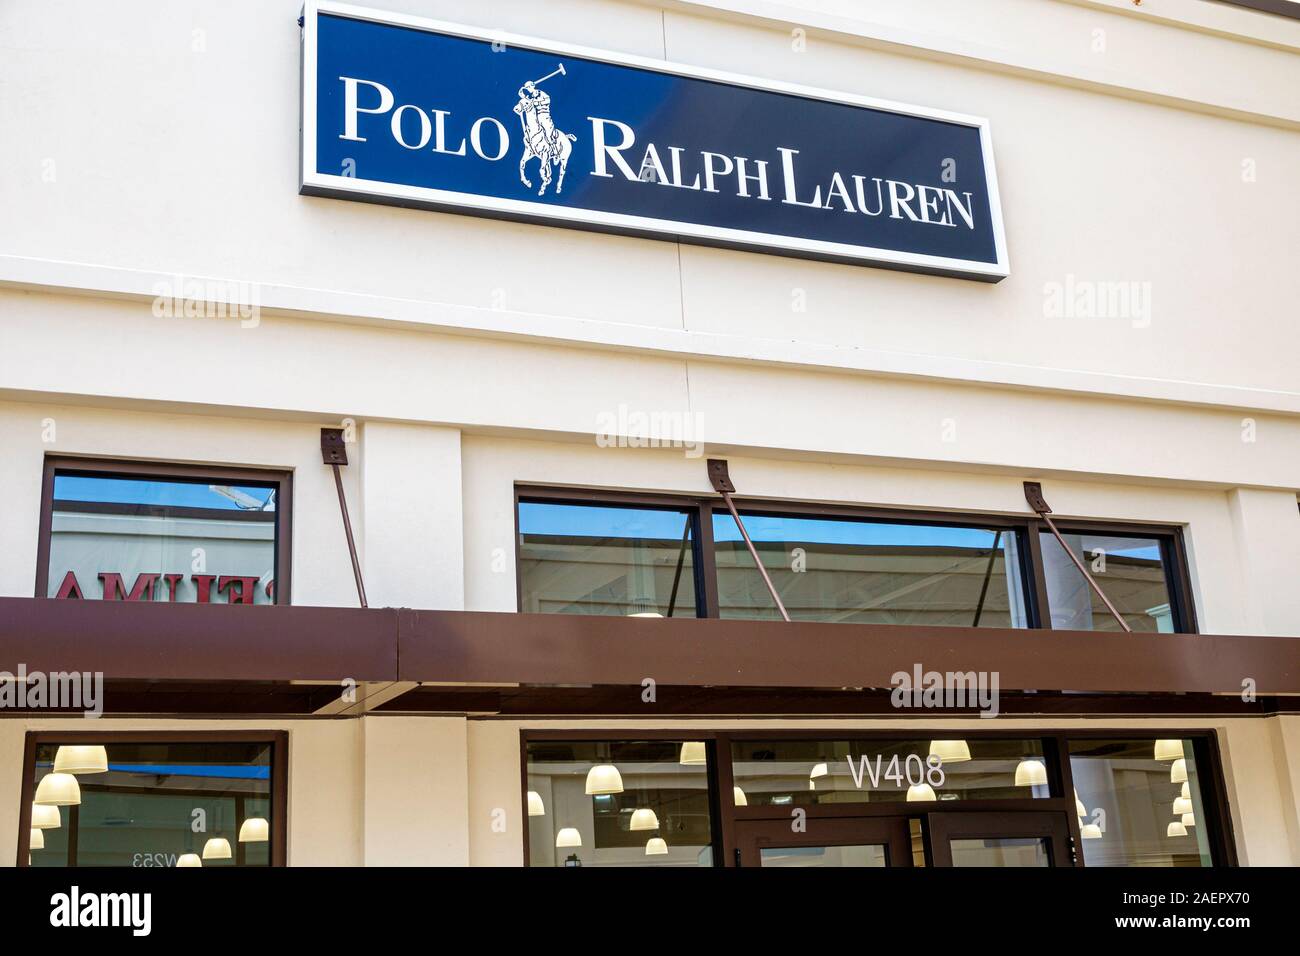 West Palm Beach Florida,Palm Beach Outlets,shopping,outdoor shopping center,Polo  Ralph Lauren,store,exterior,sign,front entrance,FL190920168 Stock Photo -  Alamy